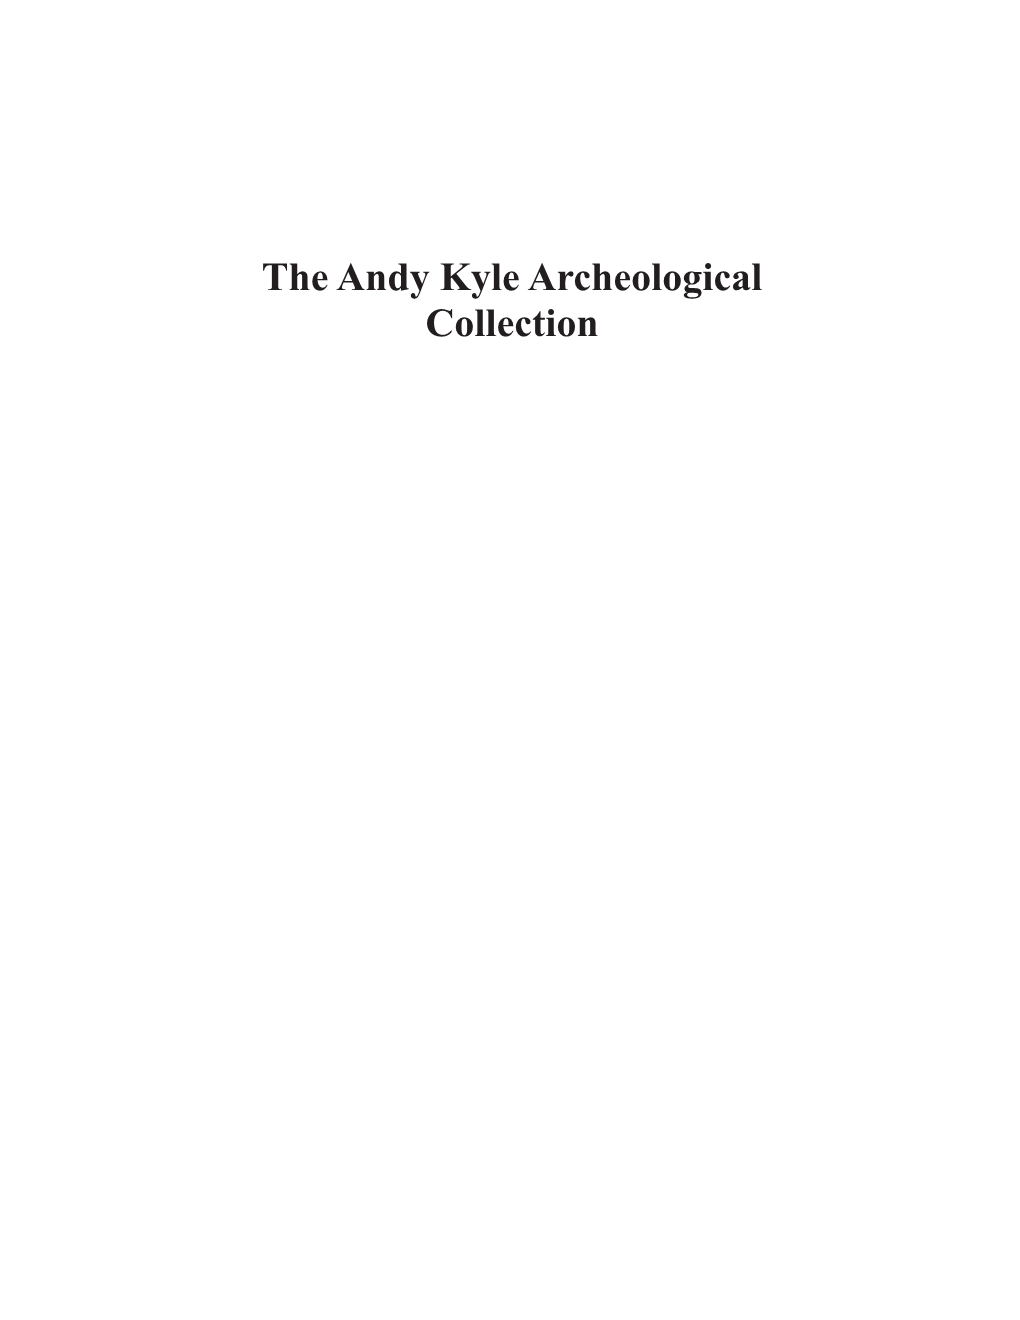 The Andy Kyle Collection Are Constructed from Chert Could Be Obtained